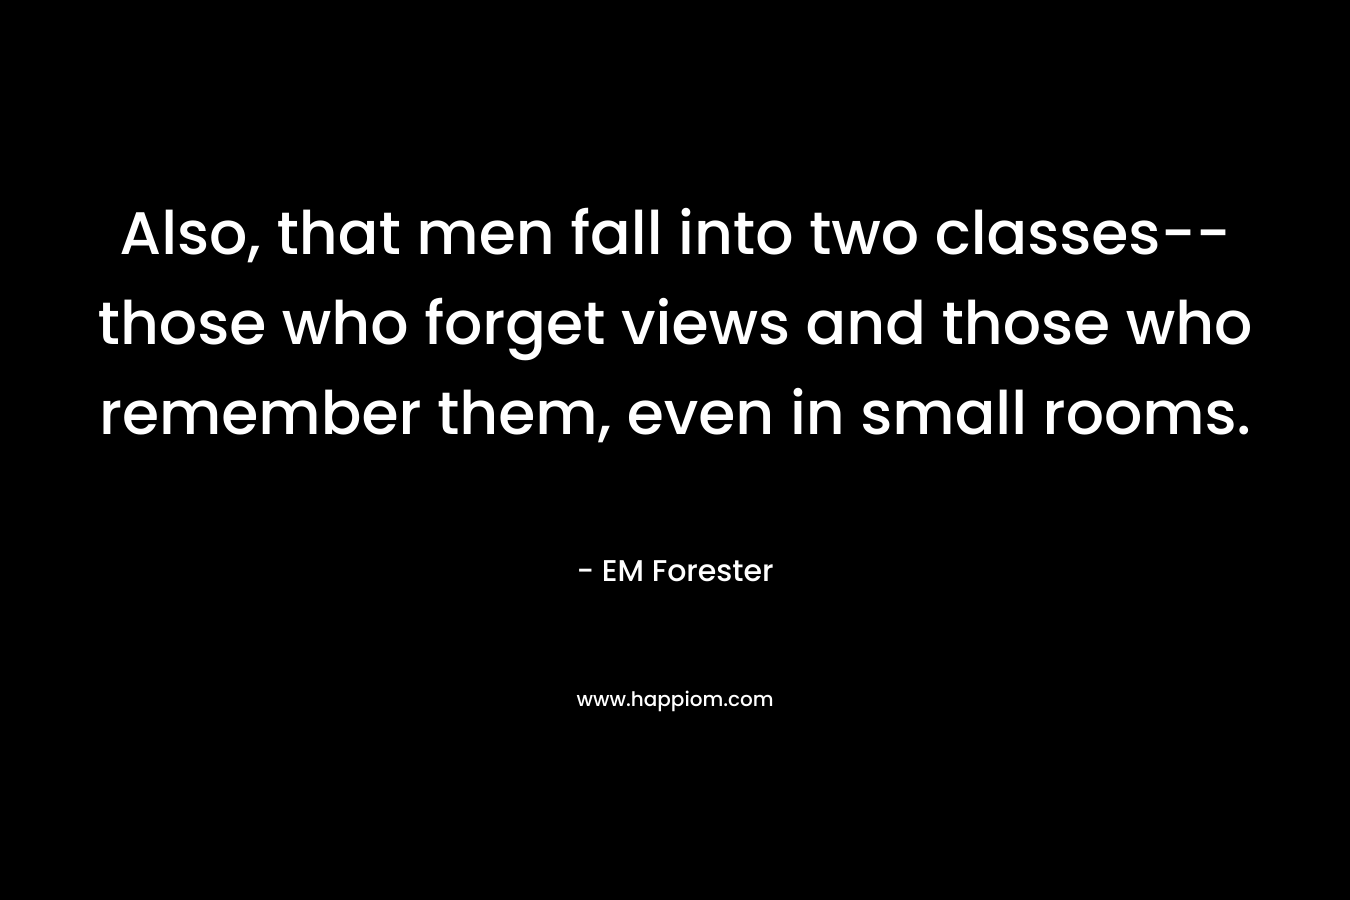 Also, that men fall into two classes--those who forget views and those who remember them, even in small rooms.